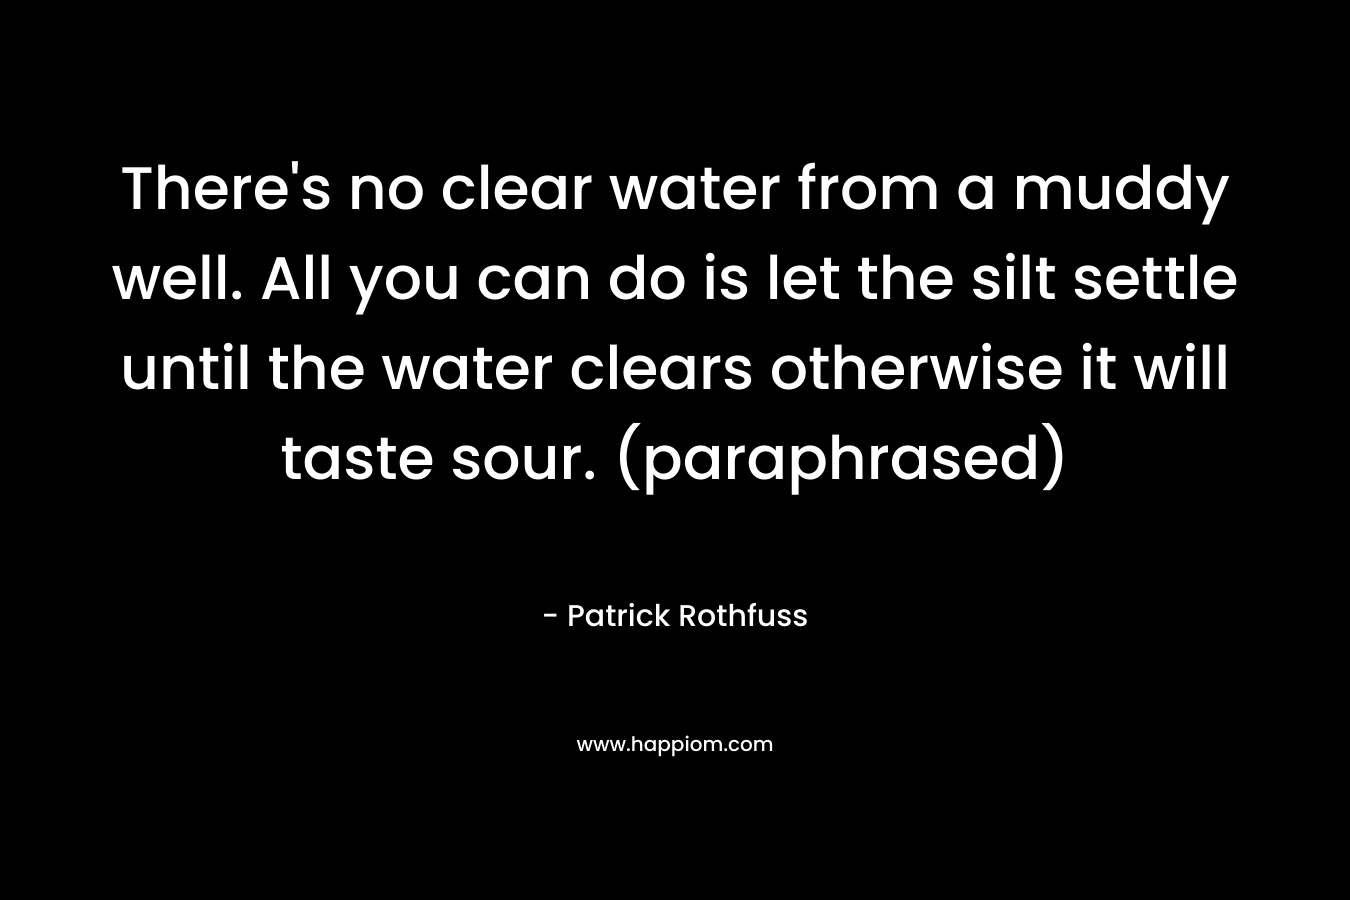 There's no clear water from a muddy well. All you can do is let the silt settle until the water clears otherwise it will taste sour. (paraphrased)